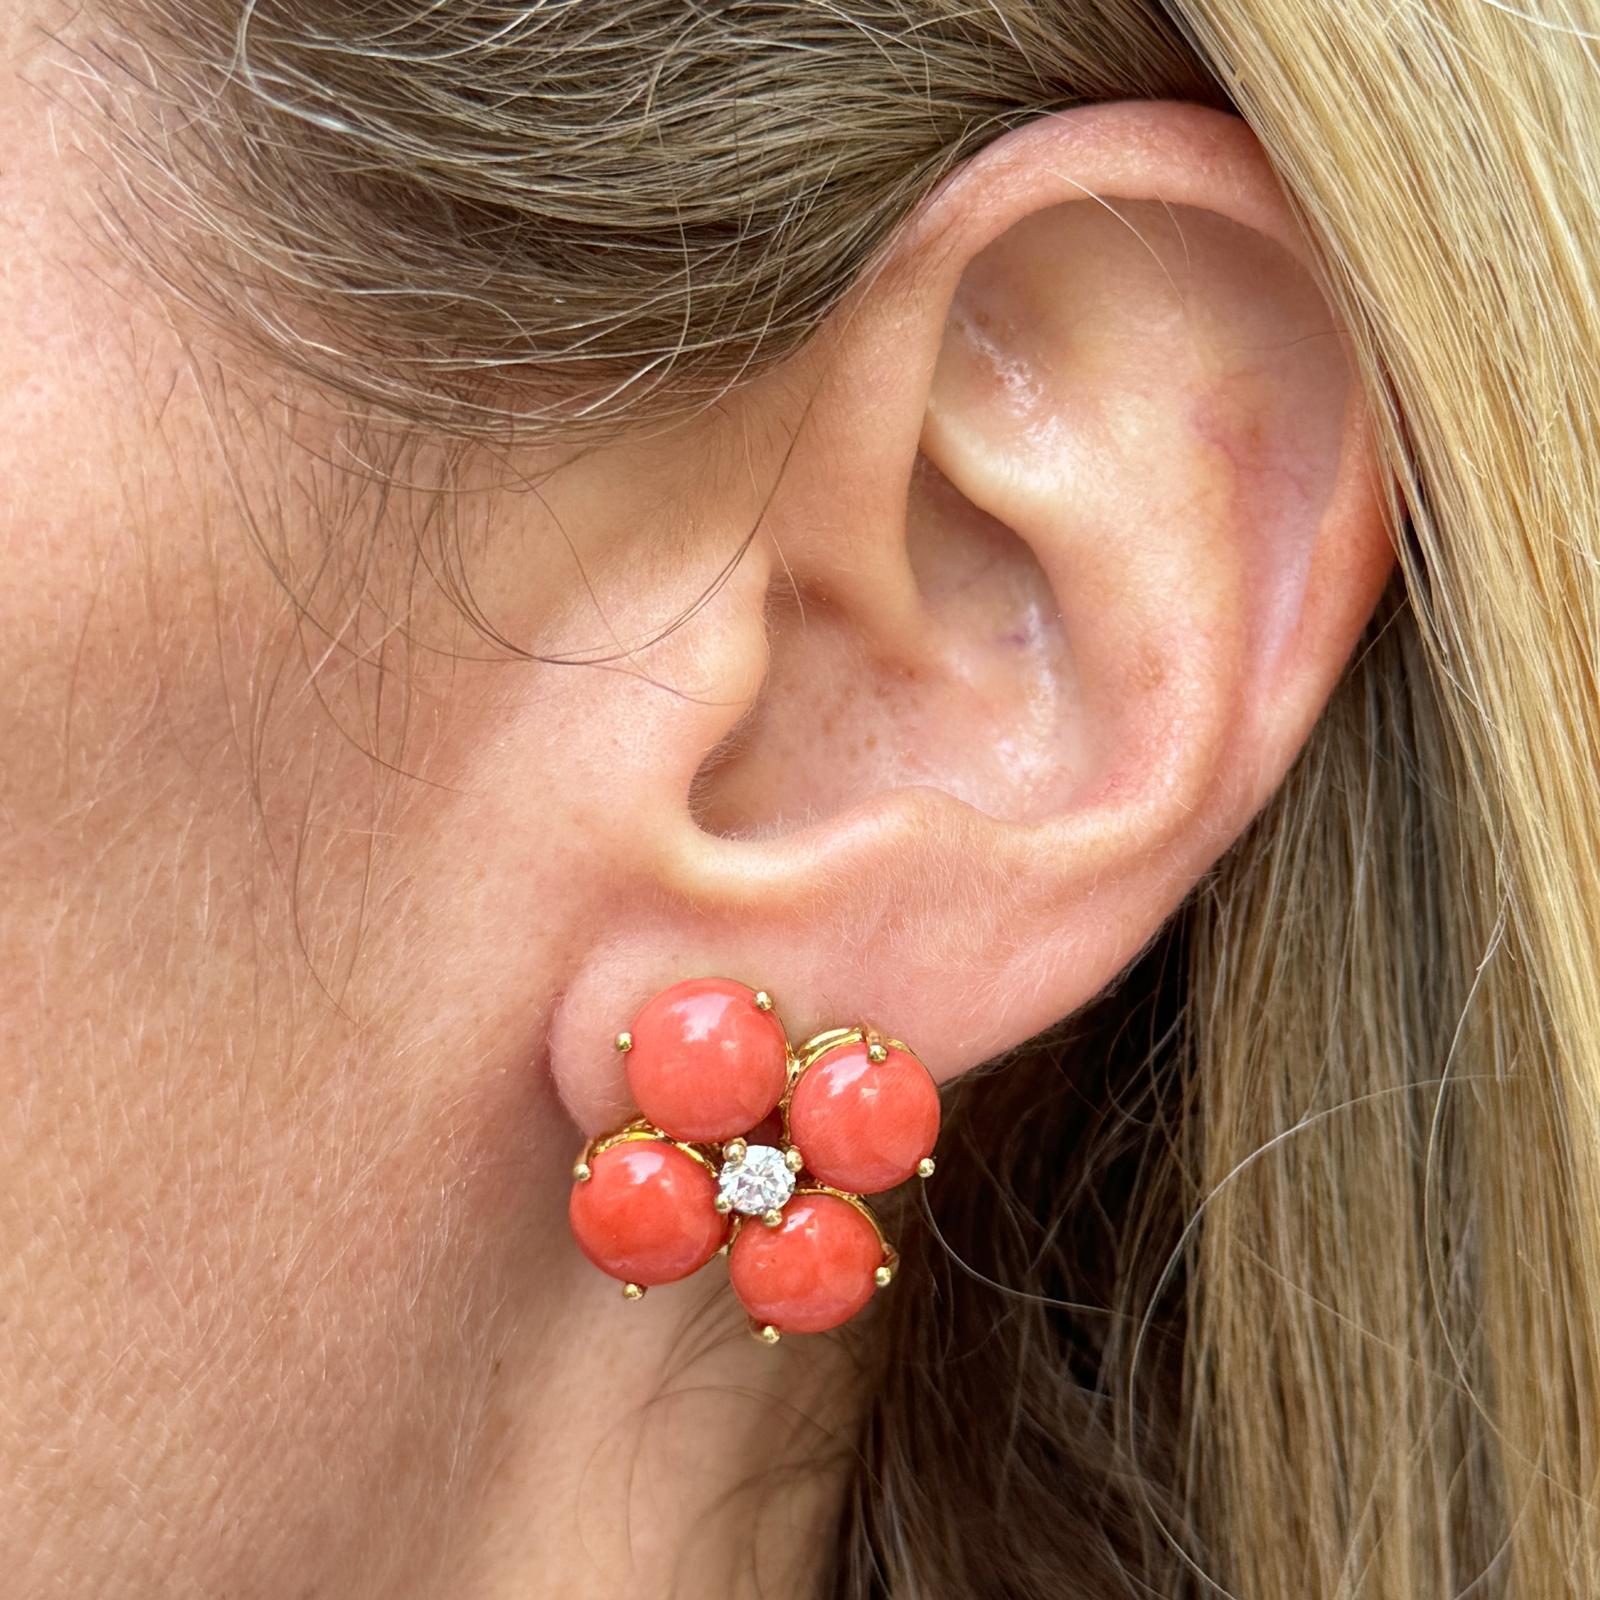 Gorgeous Italian coral and diamond floral earrings handcrafted in 18 karat yellow gold. The earrings feature 8 coral gemstones and 2 round brilliant cut diamonds weighing approximately .40 CTW. The diamonds are graded G color and VS2 clarity. The